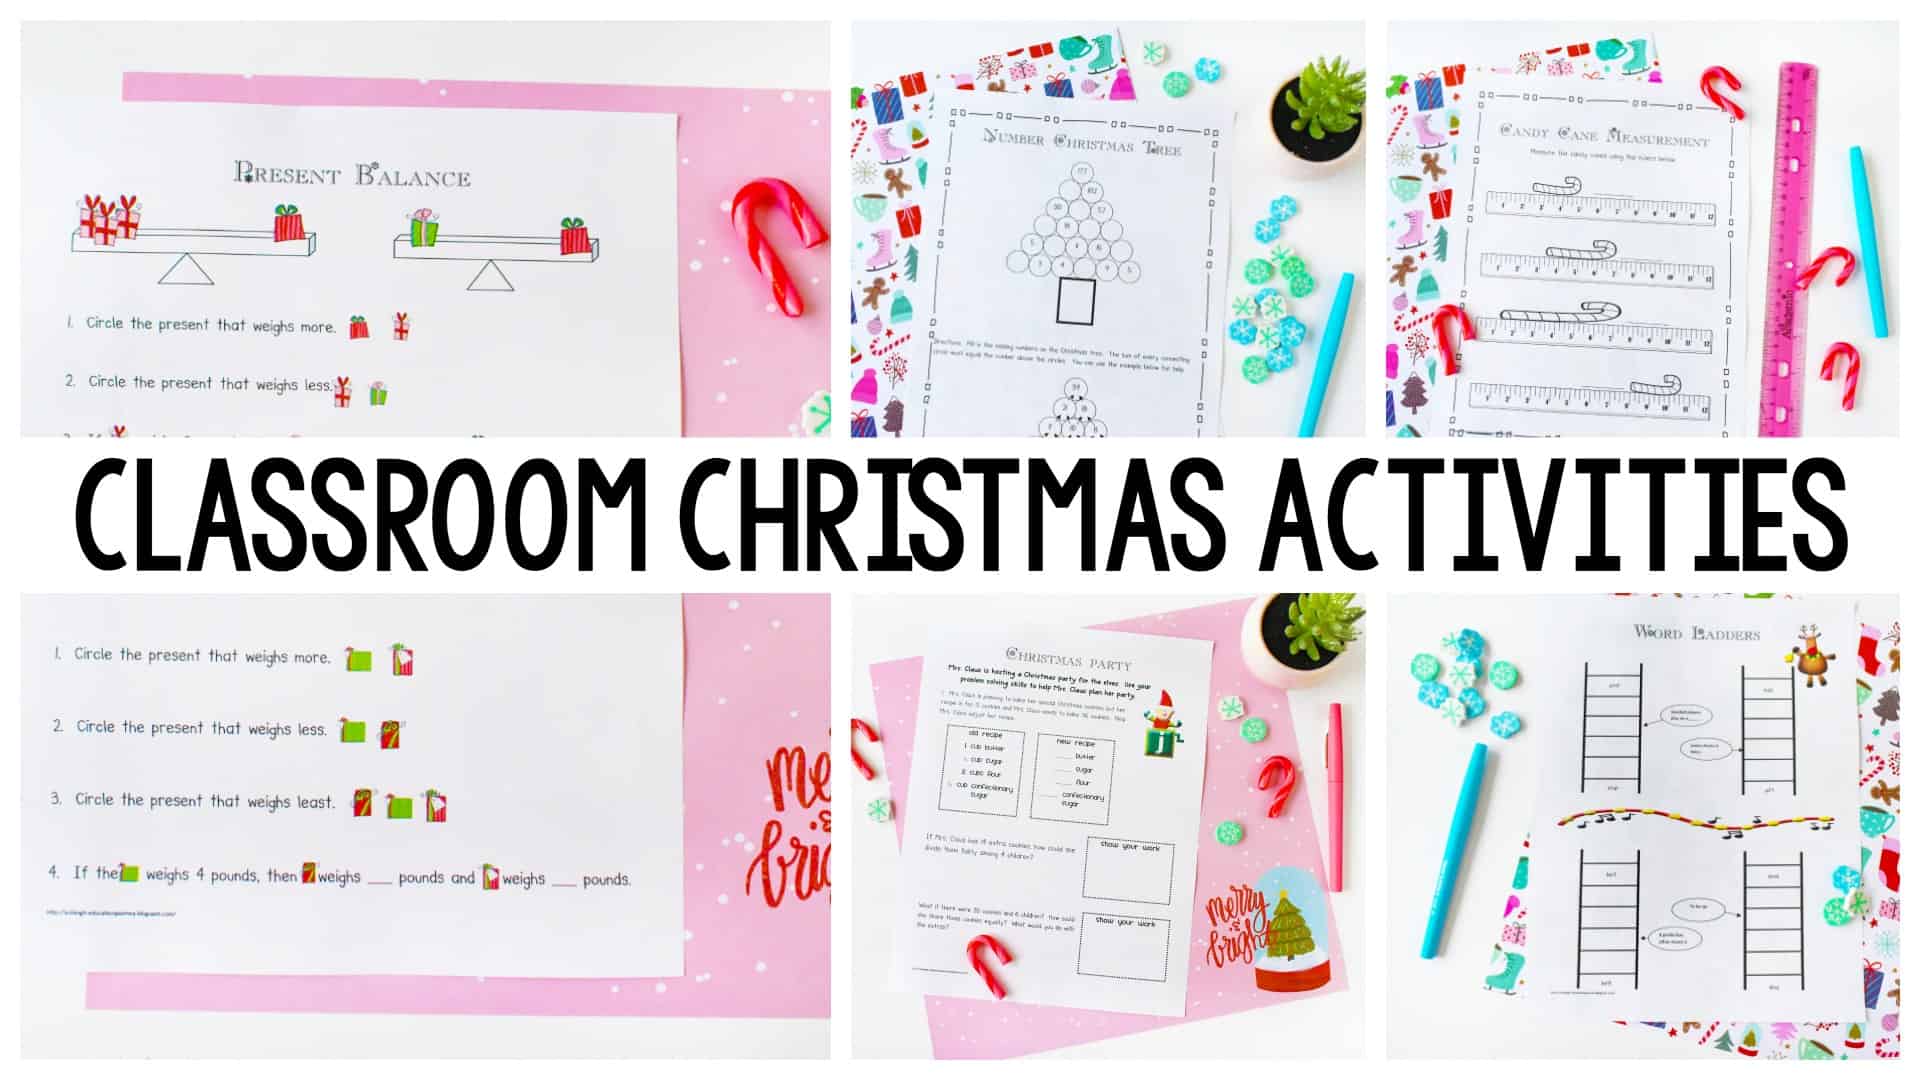 games-for-christmas-classroom-parties-a-girl-and-a-glue-gun